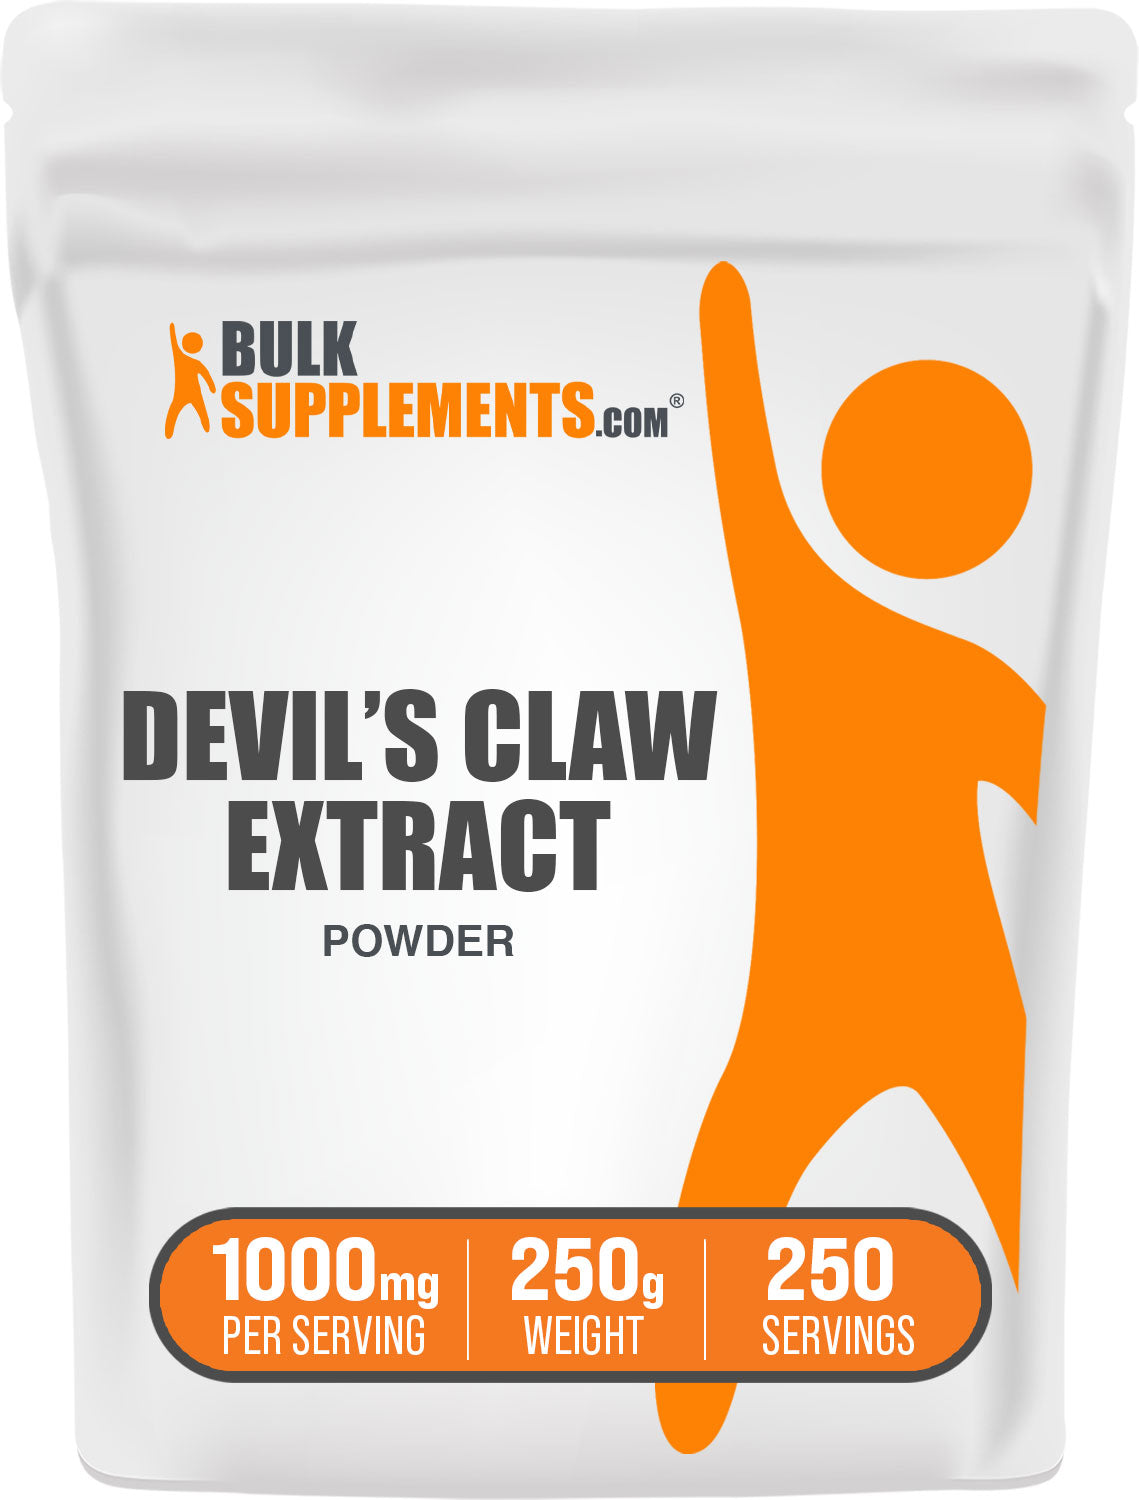 BulkSupplements.com Devil's Claw Extract power 250g bag